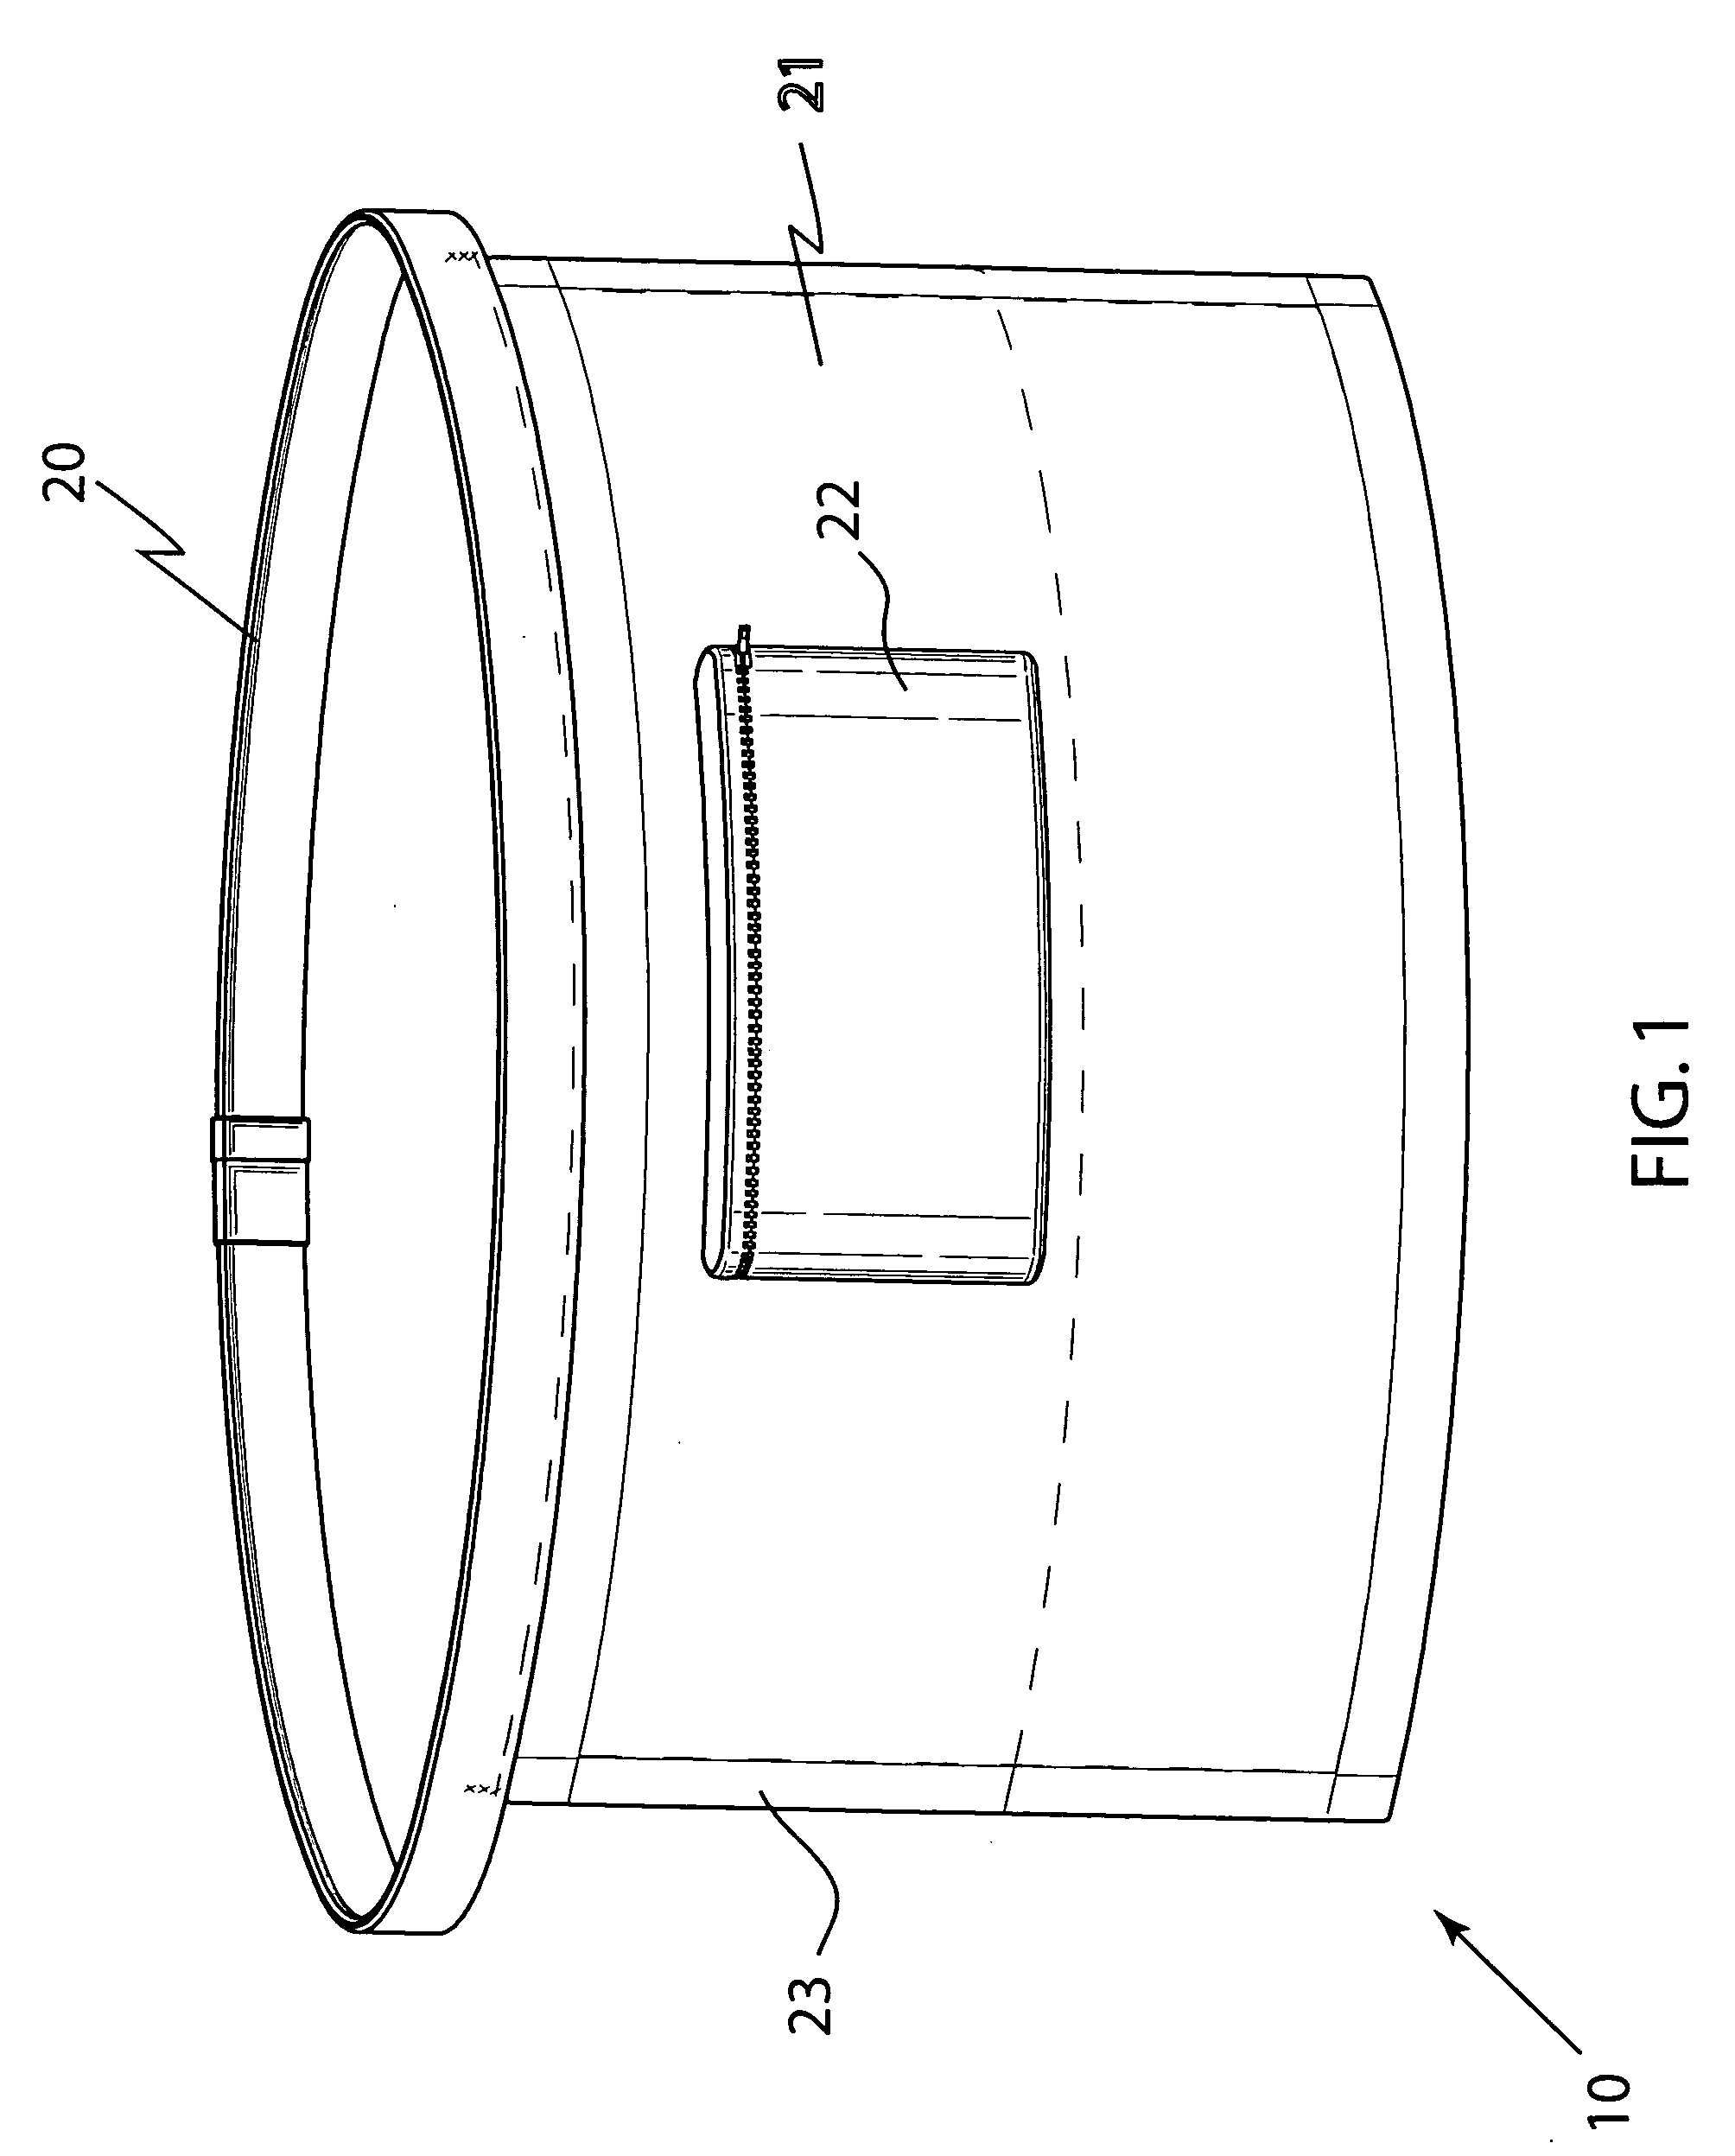 Male apron for receiving and storing excreted body fluids and associated method